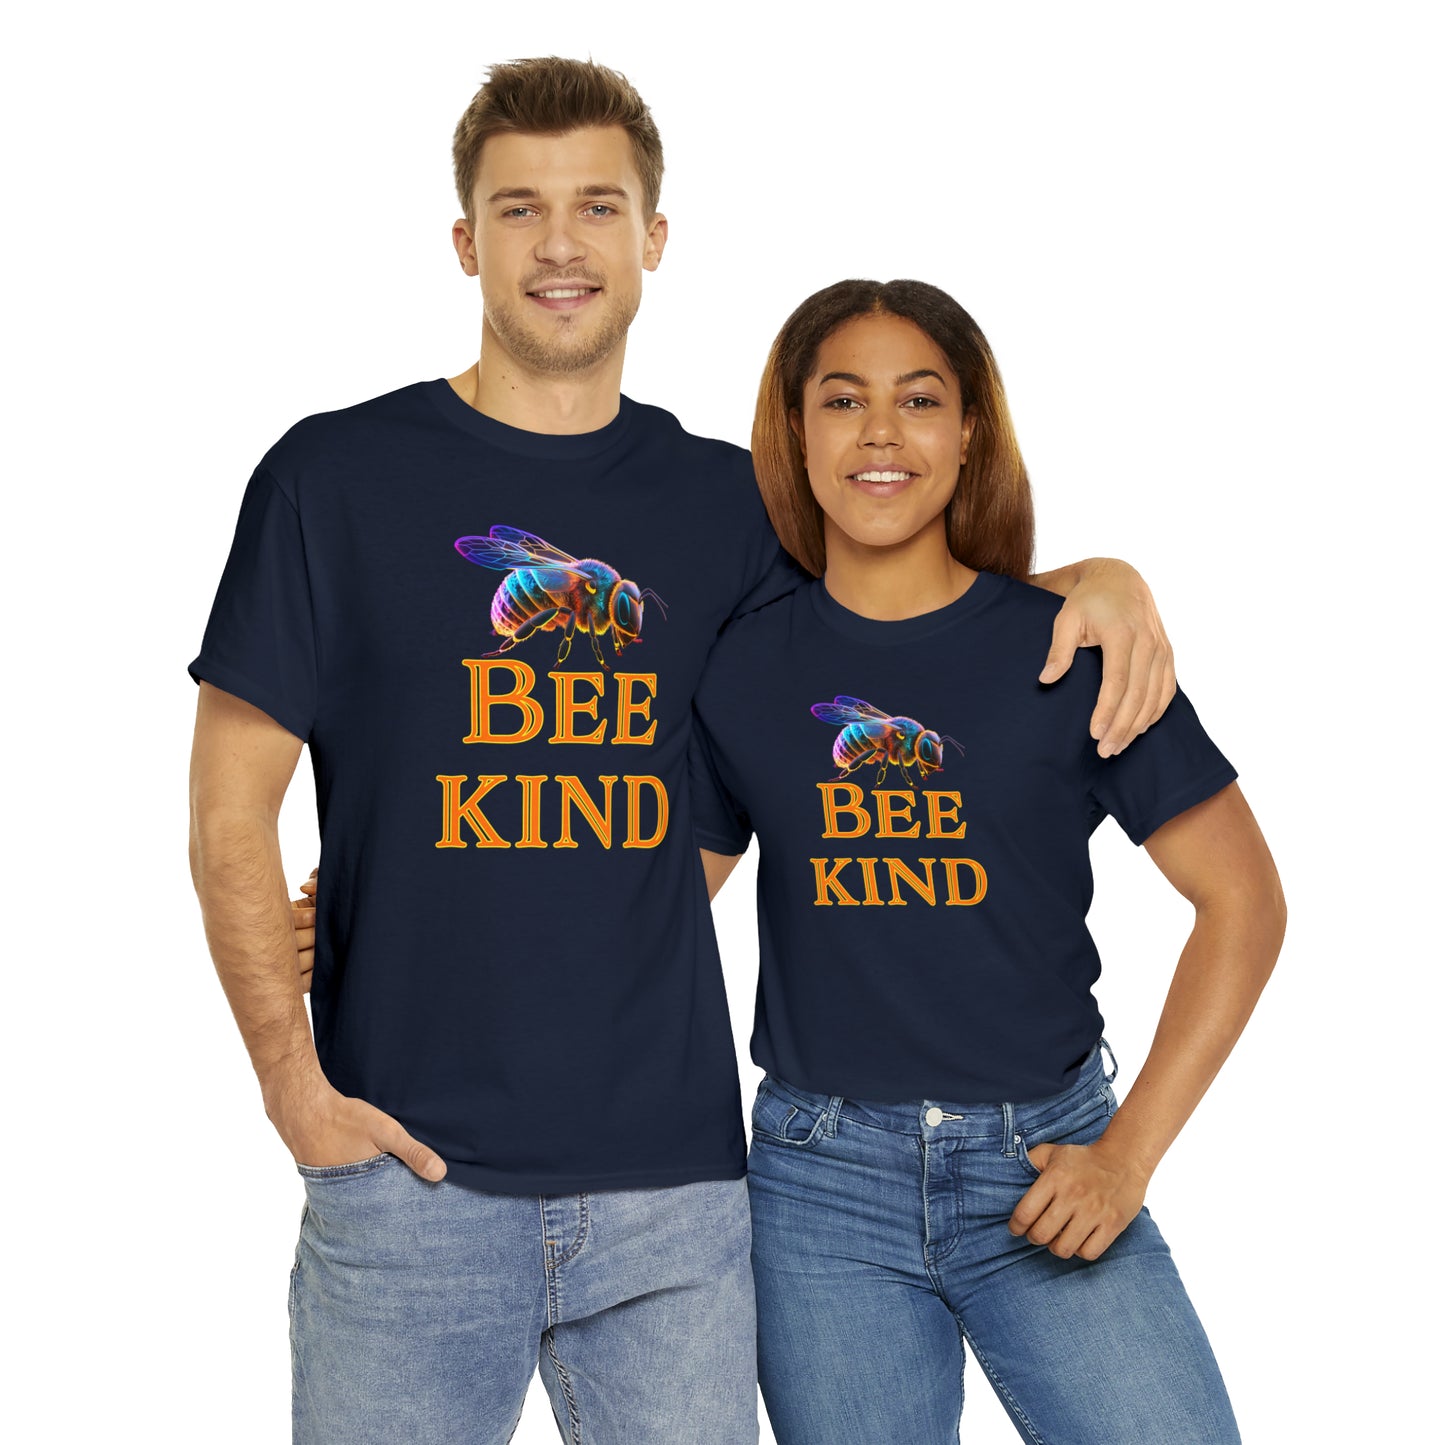 Be Kind T-Shirt For Bee Keeper TShirt For Bee Lover T Shirt For Bee Friendly Gift